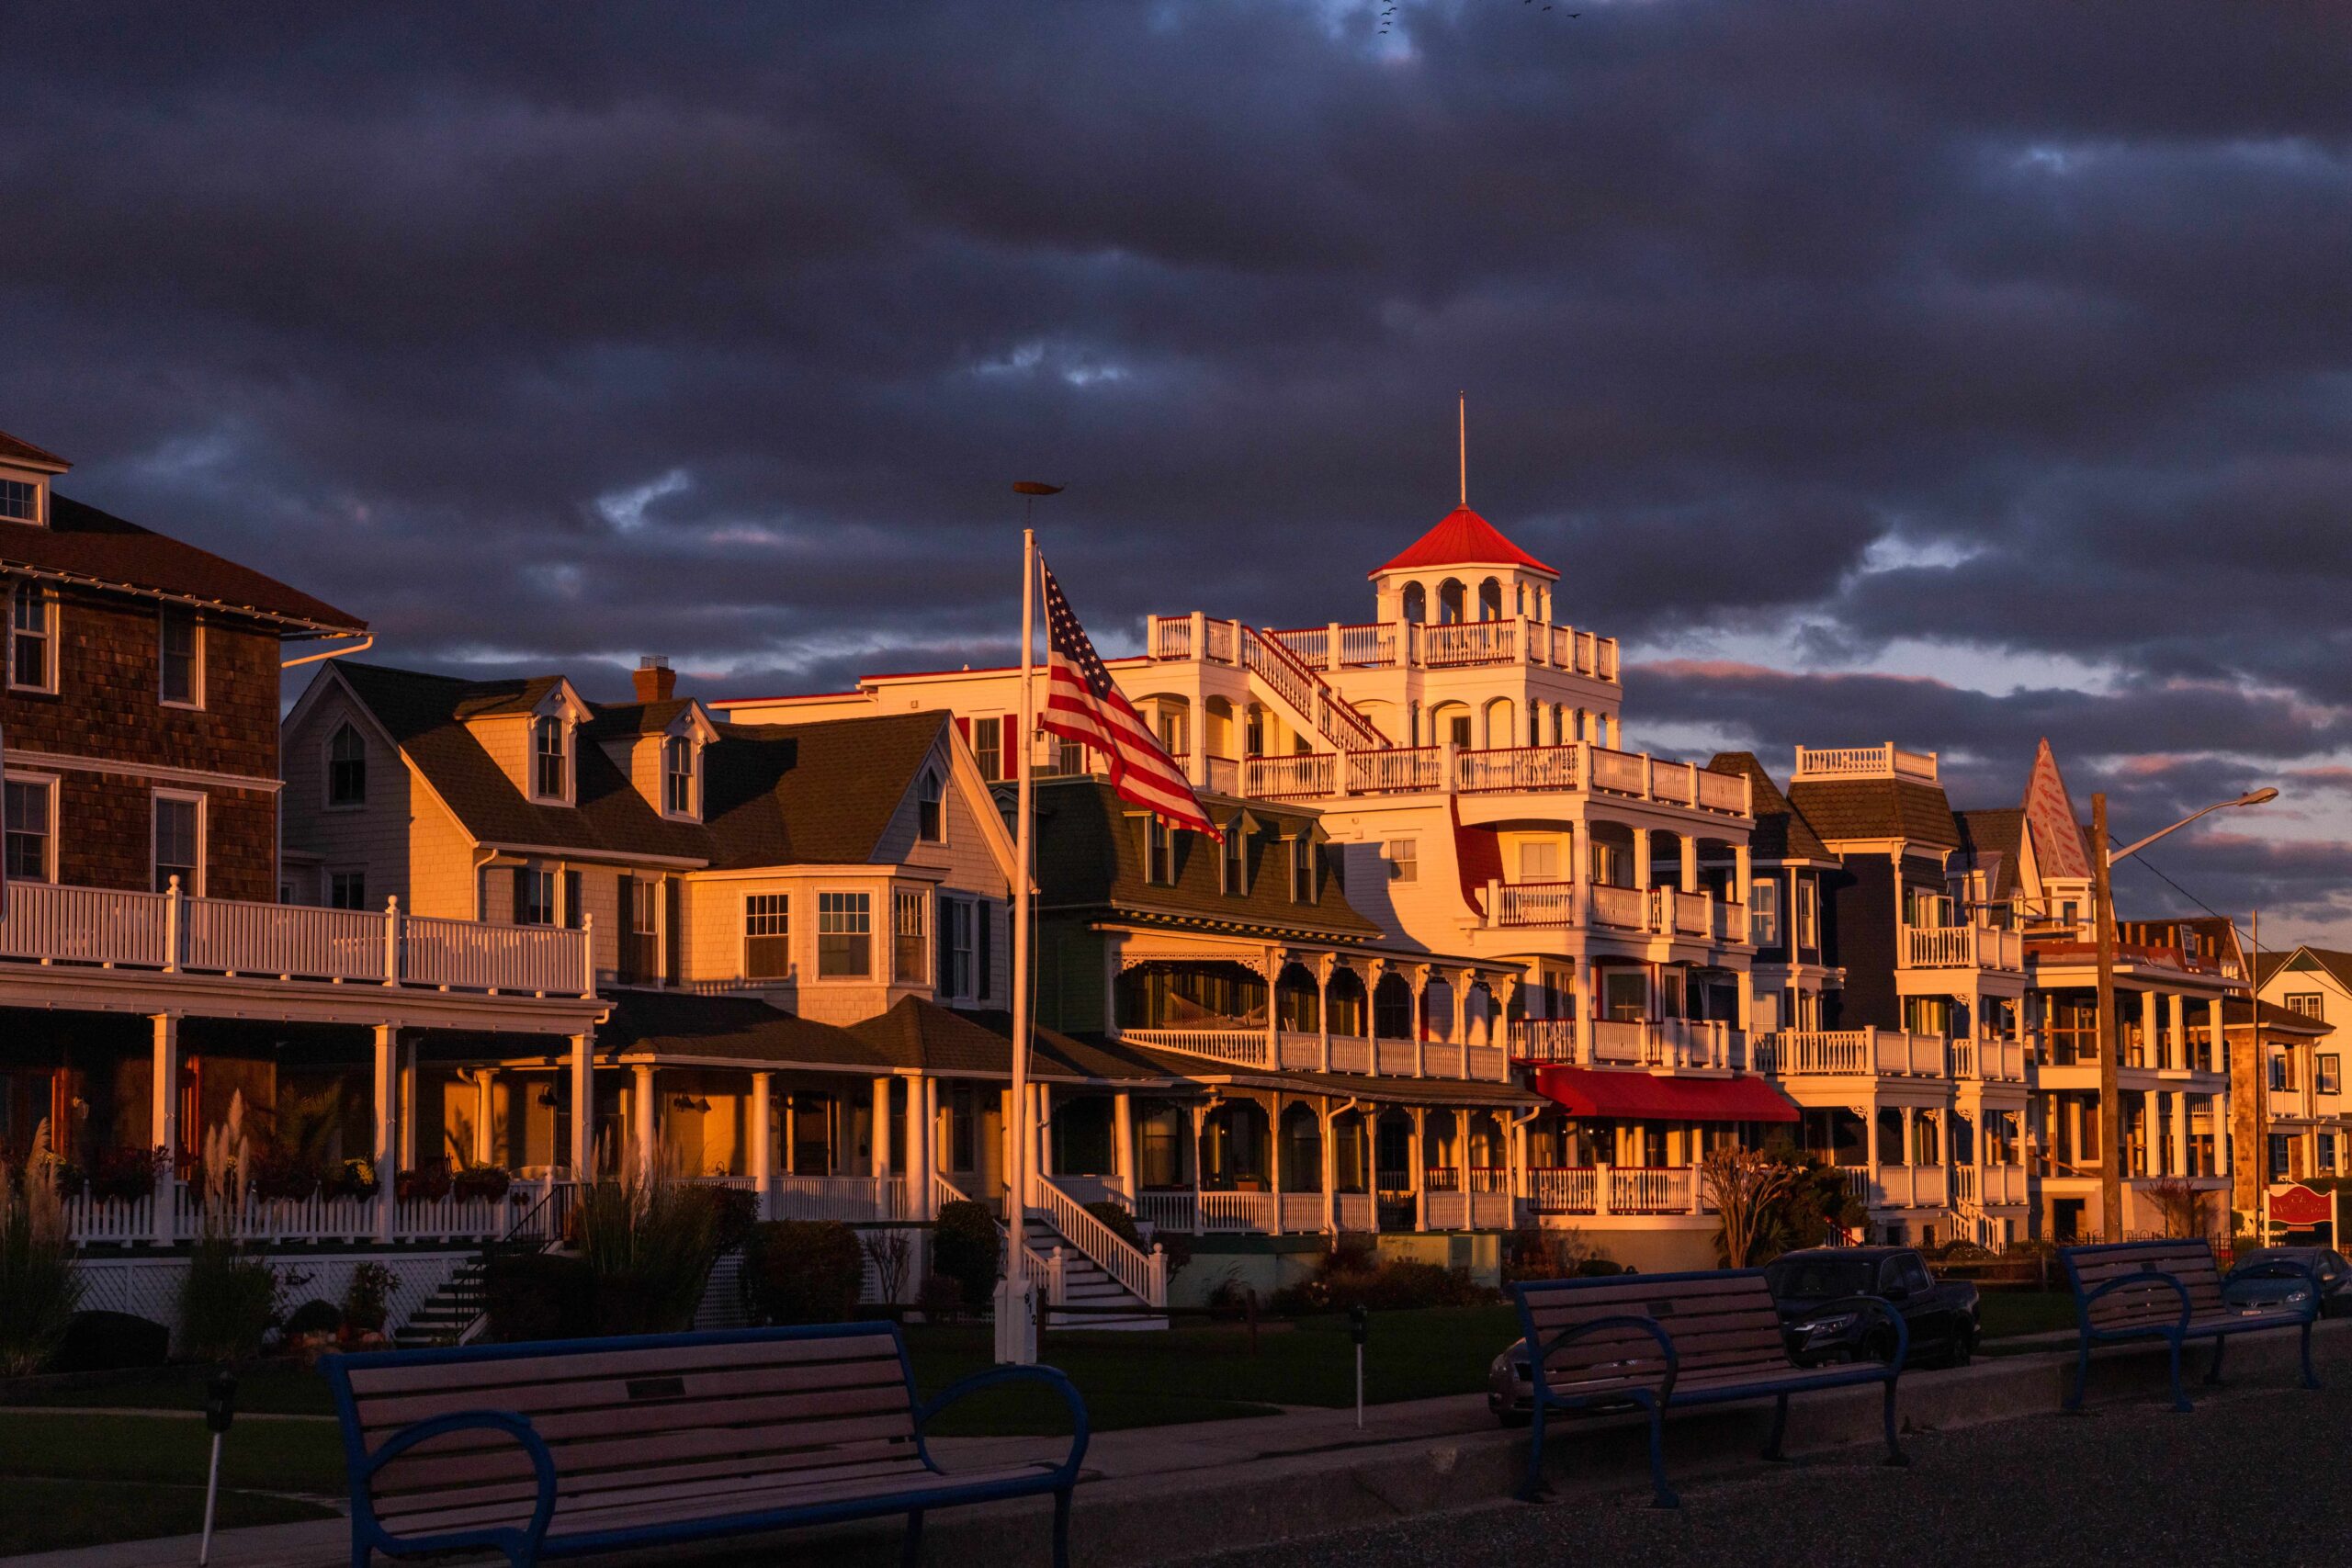 Sunset light shining on Victorian houses on Beach Ave with purple clouds in the sky and the promenade benches in the foreground